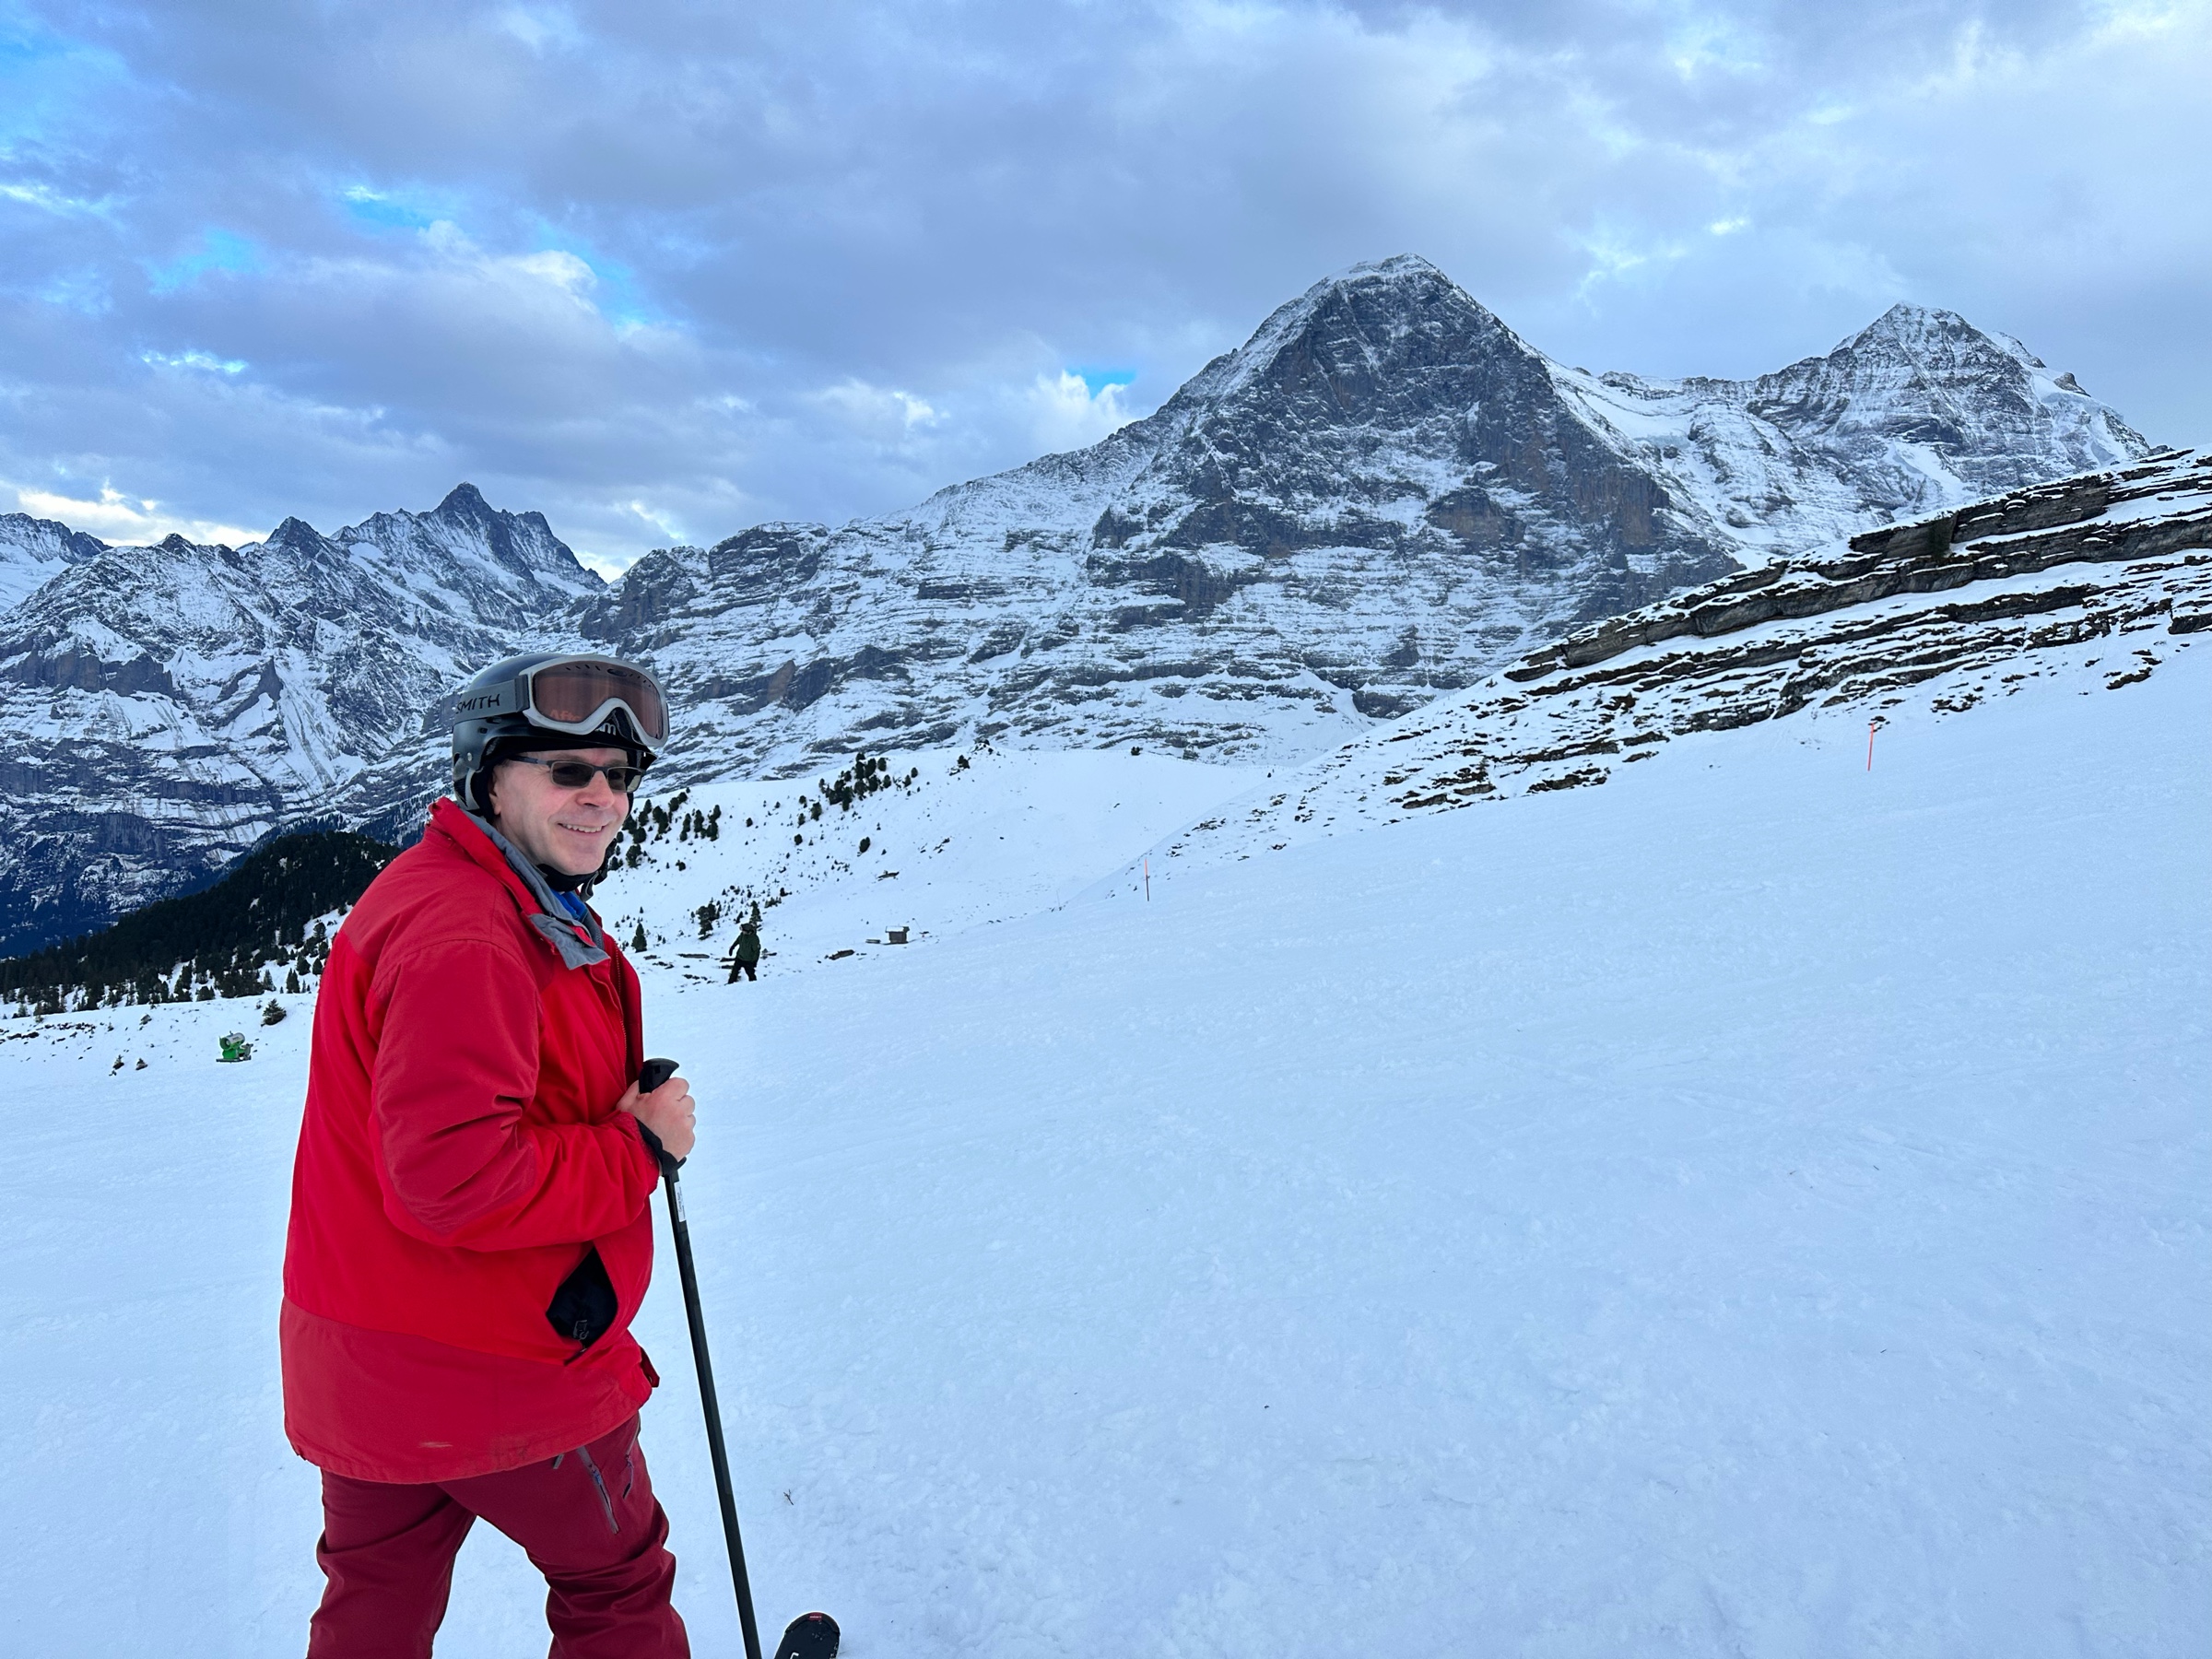 Photo of a skier (me) in front of the Eiger mountain in Switzerland